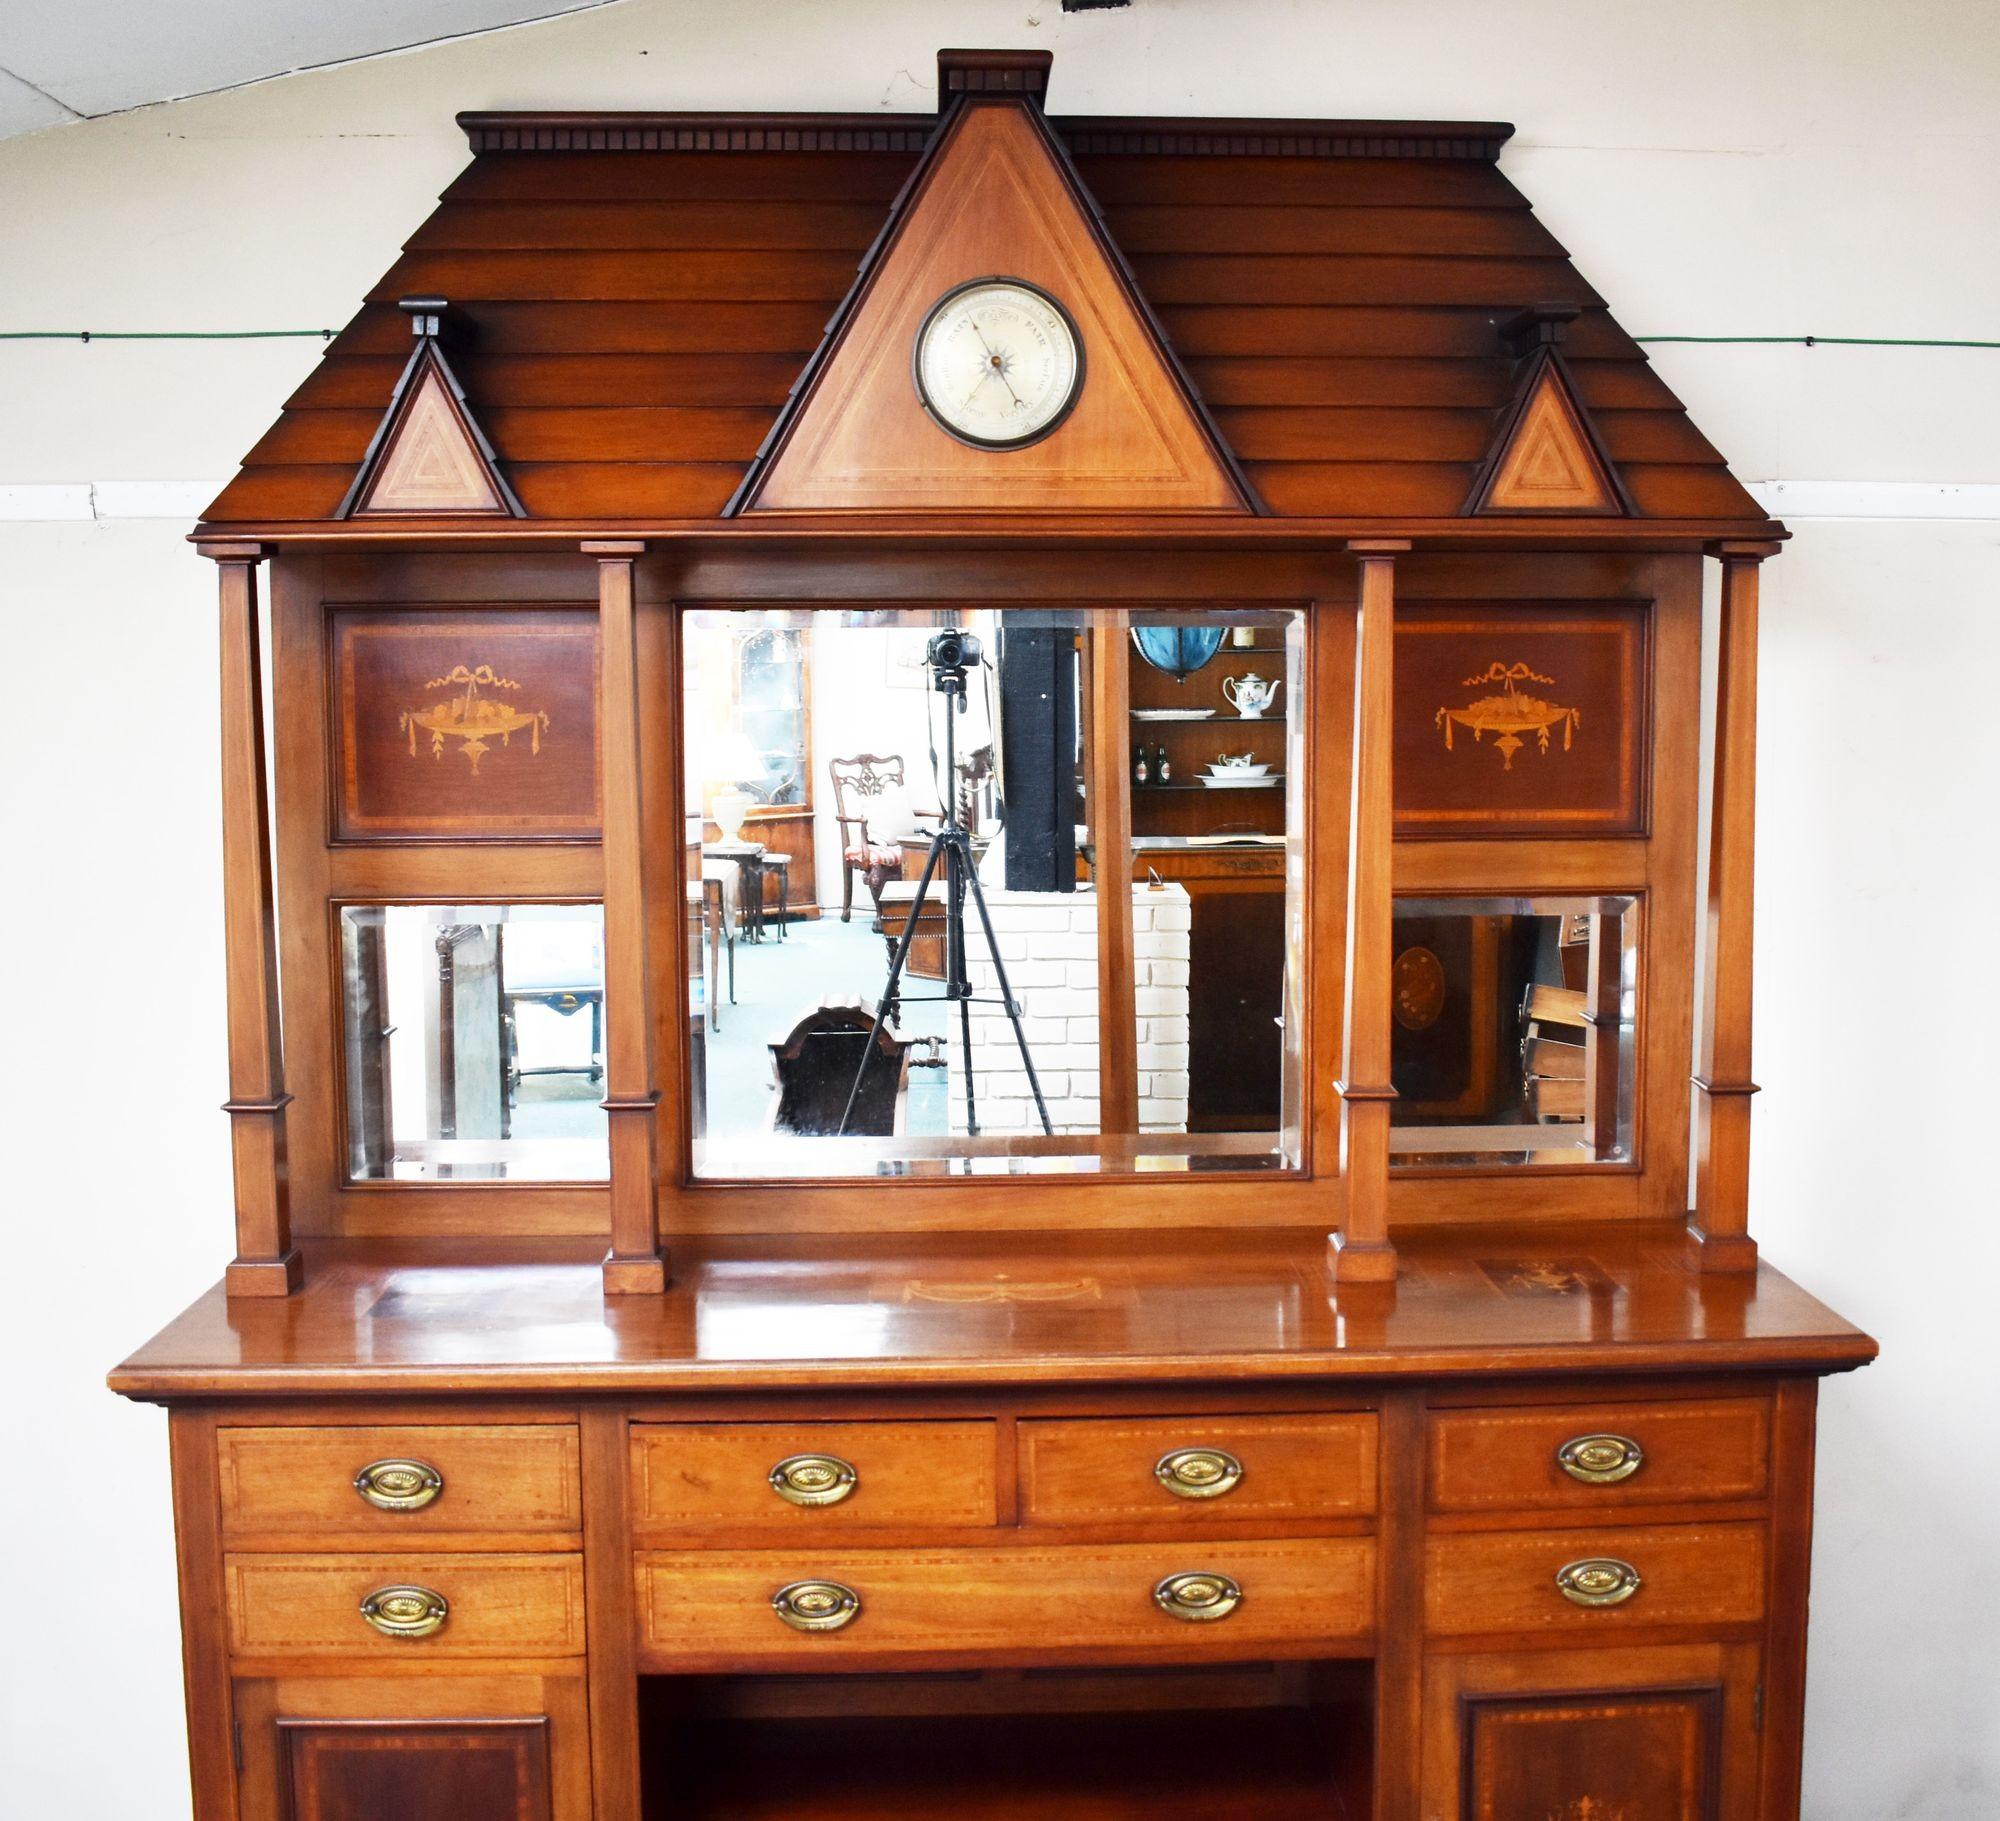 For sale is a good quality, highly unusual, Victorian inlaid walnut mirror back sideboard, the top is of architectural form with a barometer to the centre, supported by tapered columns above the inlaid top. Below this the sideboard has an